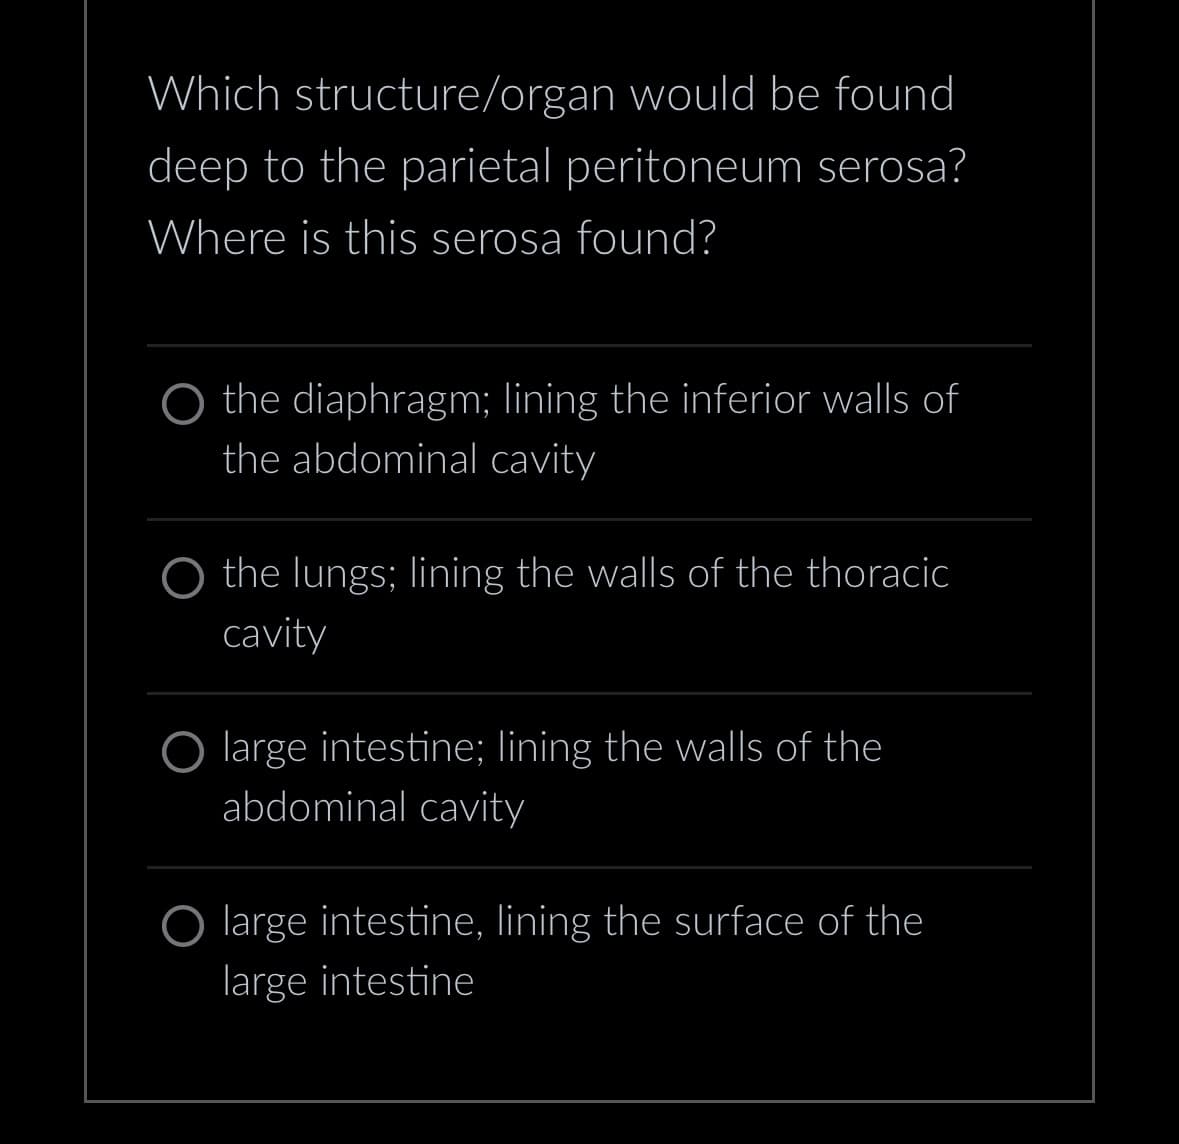 Which structure/organ would be found
deep to the parietal peritoneum serosa?
Where is this serosa found?
O the diaphragm; lining the inferior walls of
the abdominal cavity
O the lungs; lining the walls of the thoracic
cavity
O large intestine; lining the walls of the
abdominal cavity
O large intestine, lining the surface of the
large intestine